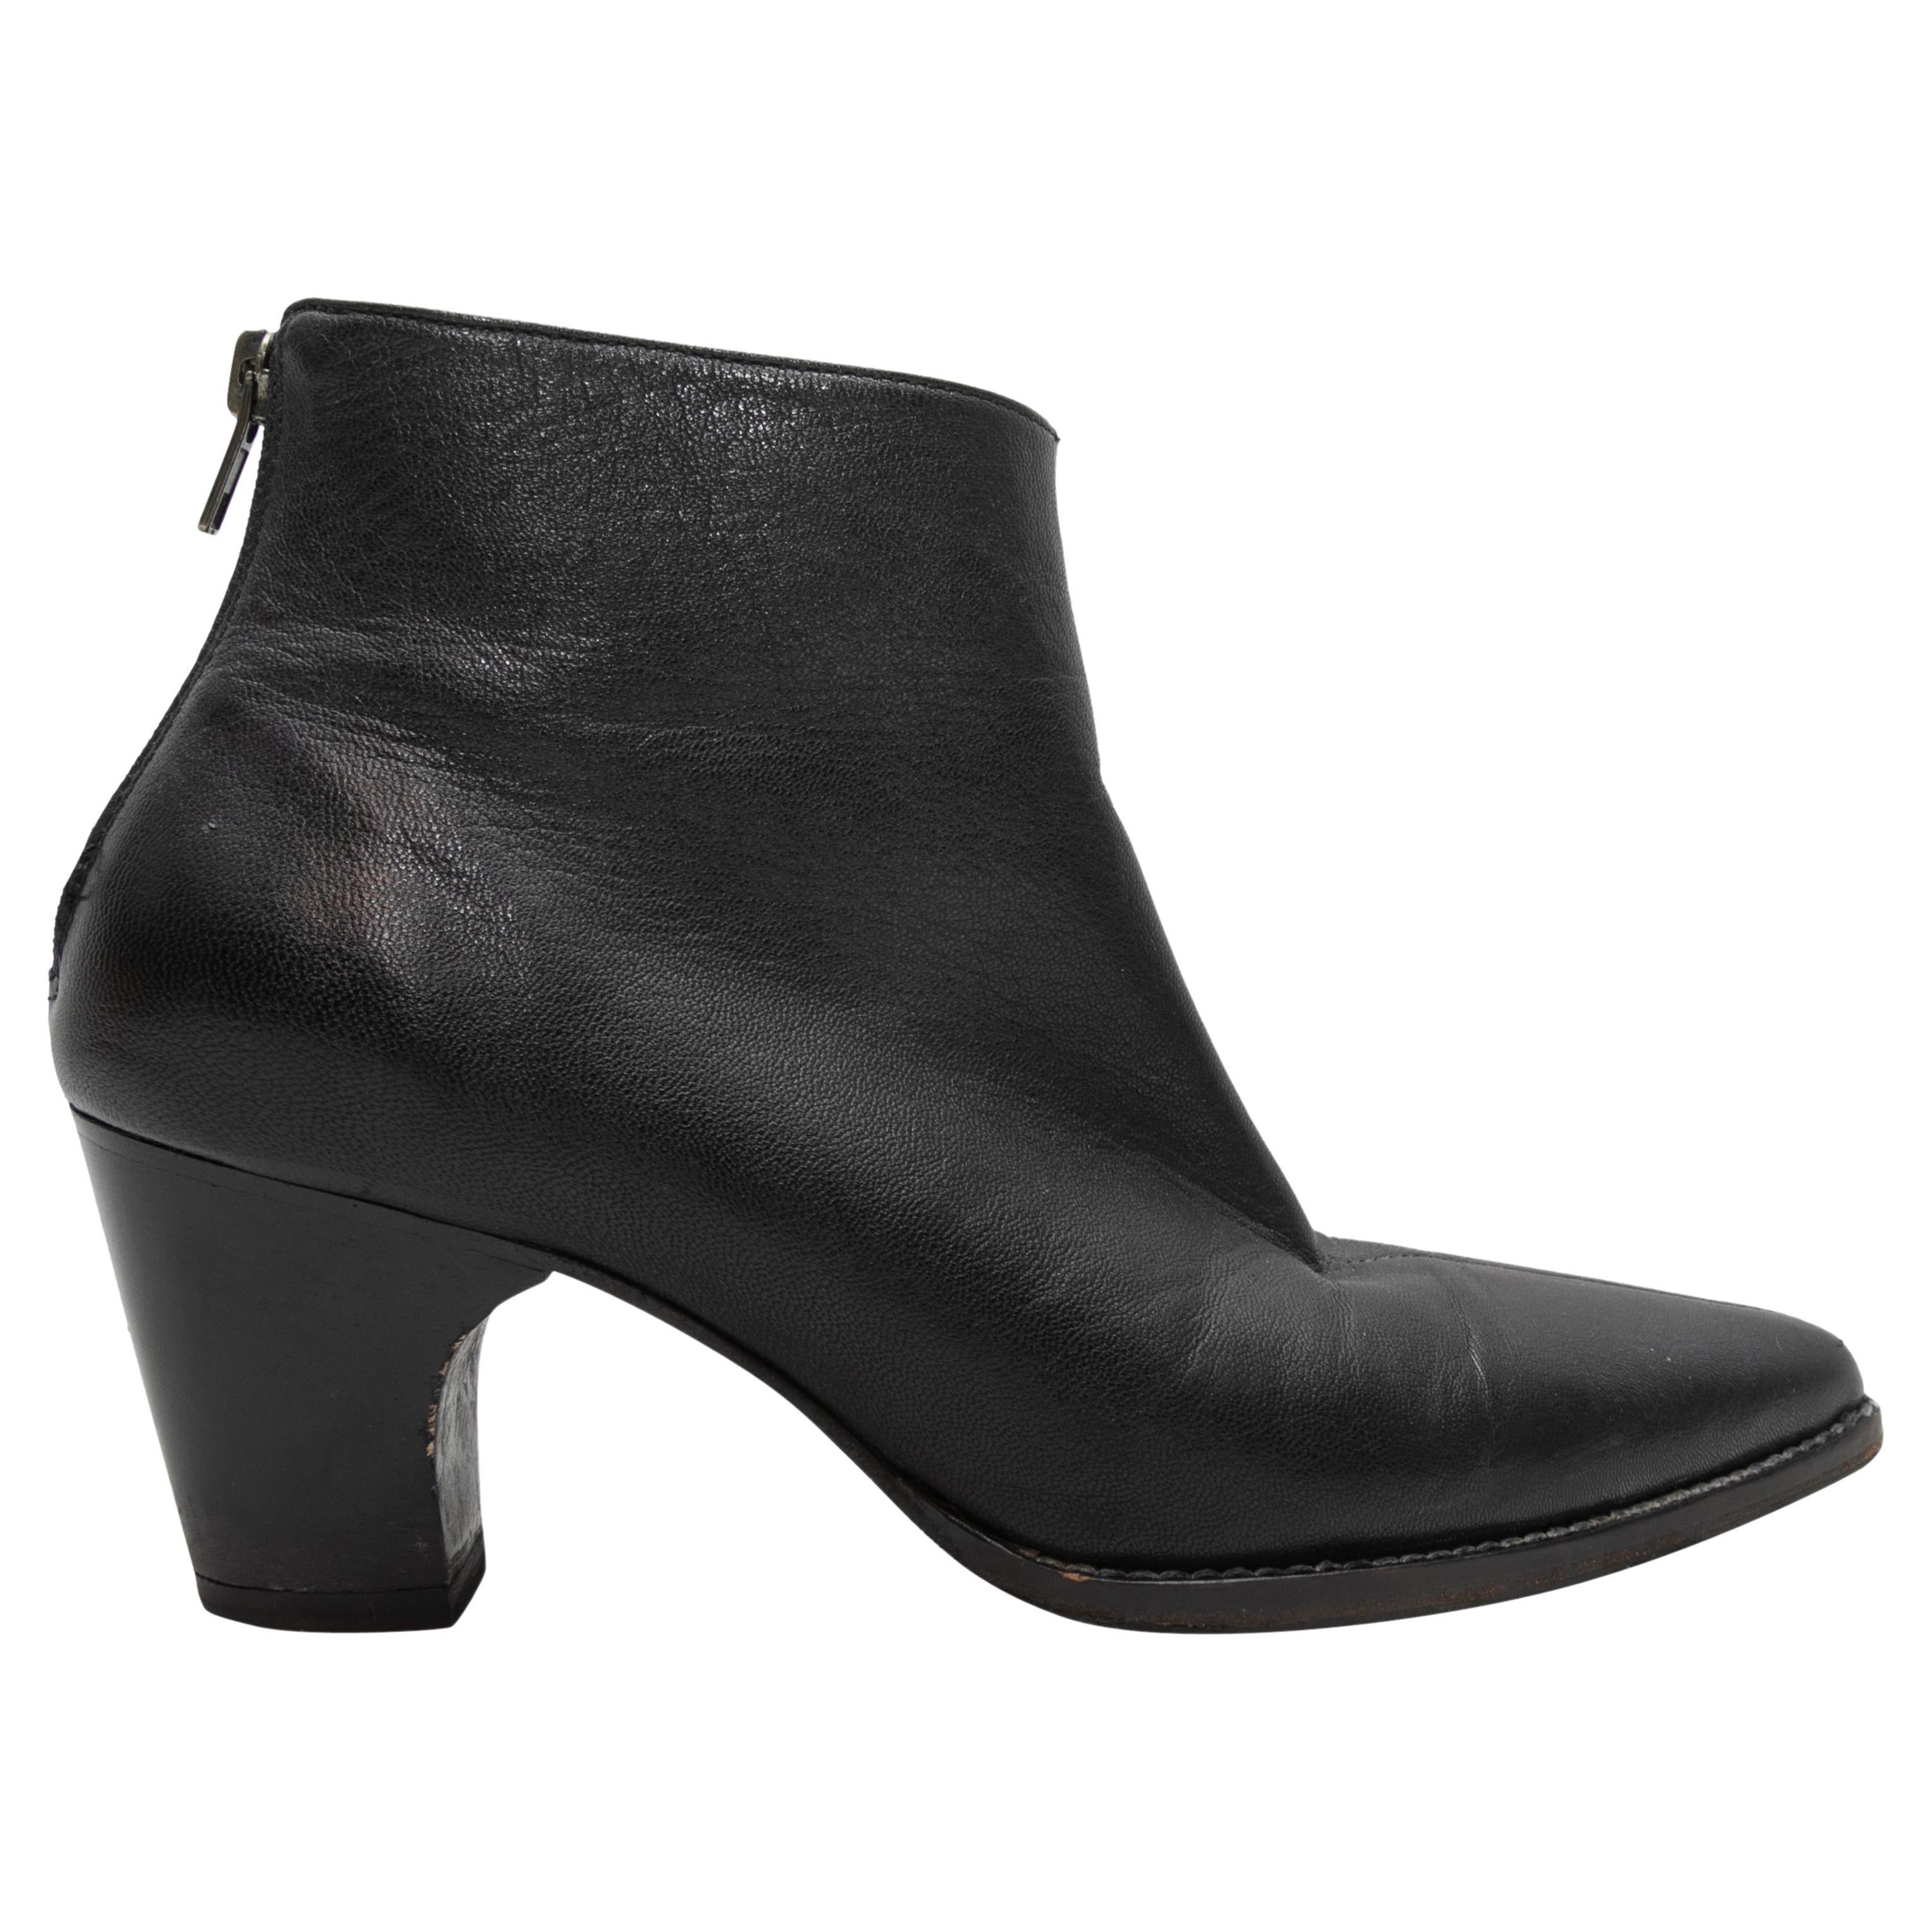 Black Rachel Comey Pointed-Toe Ankle Boots Size 37